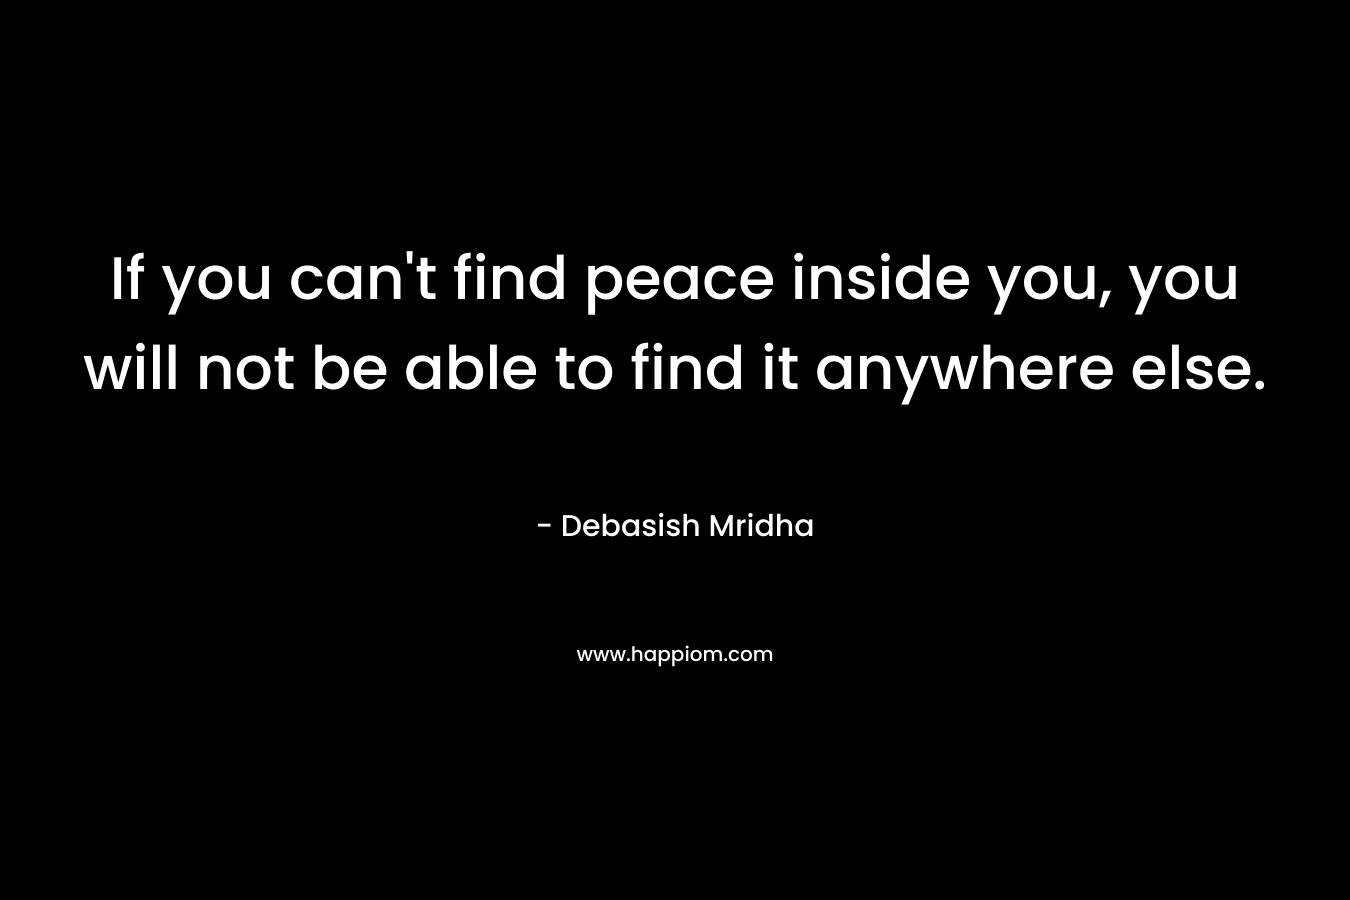 If you can't find peace inside you, you will not be able to find it anywhere else.